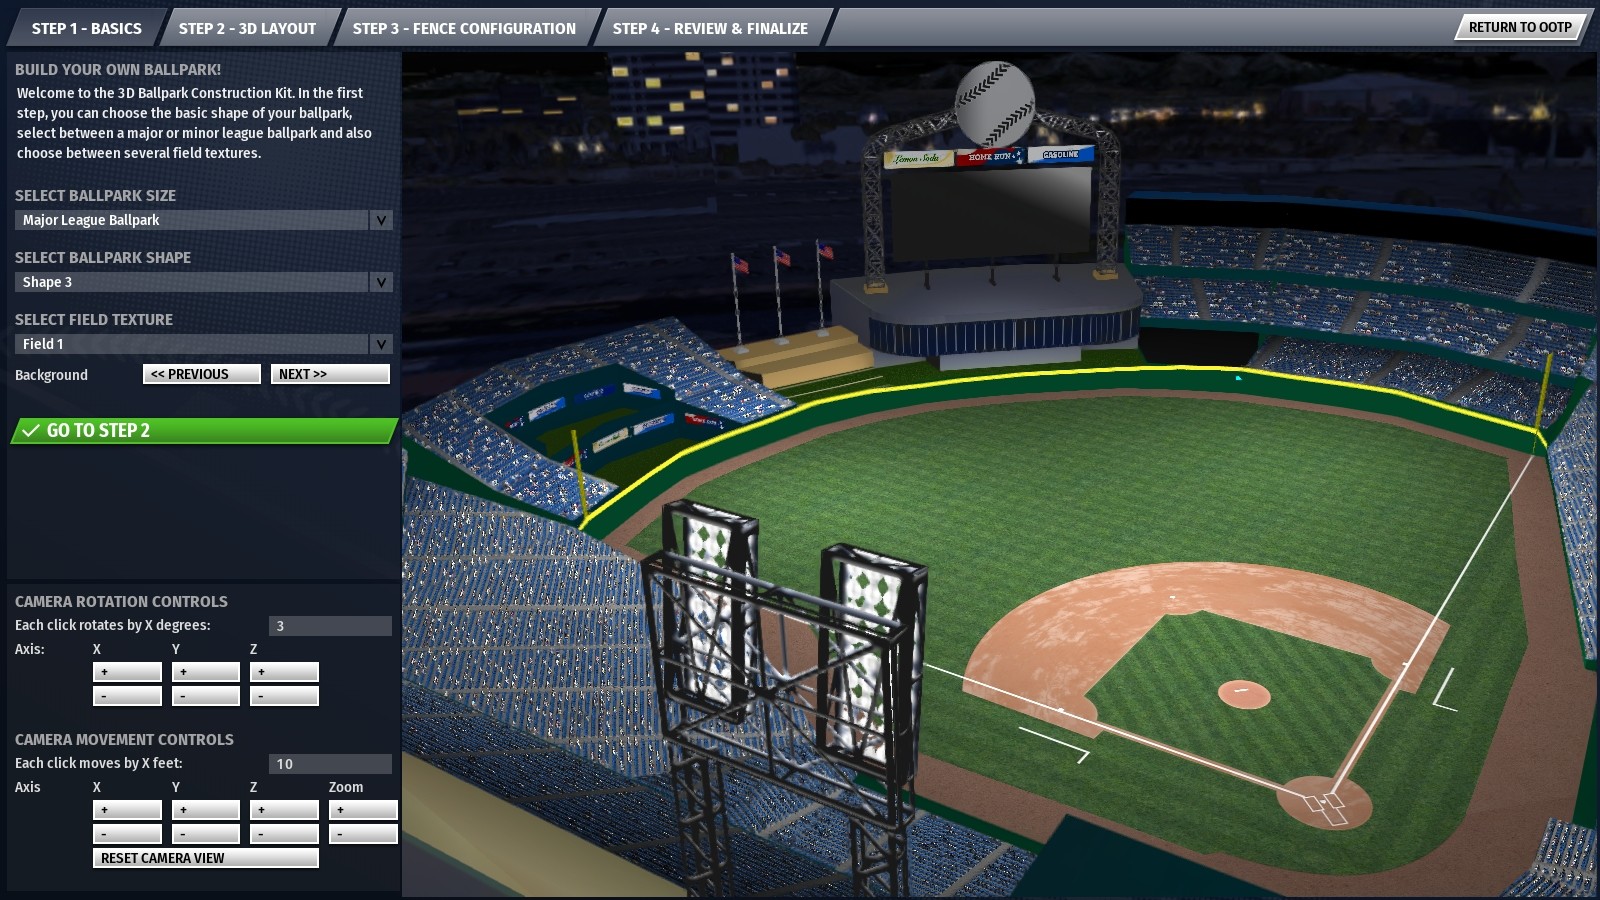 ootp baseball 21 review